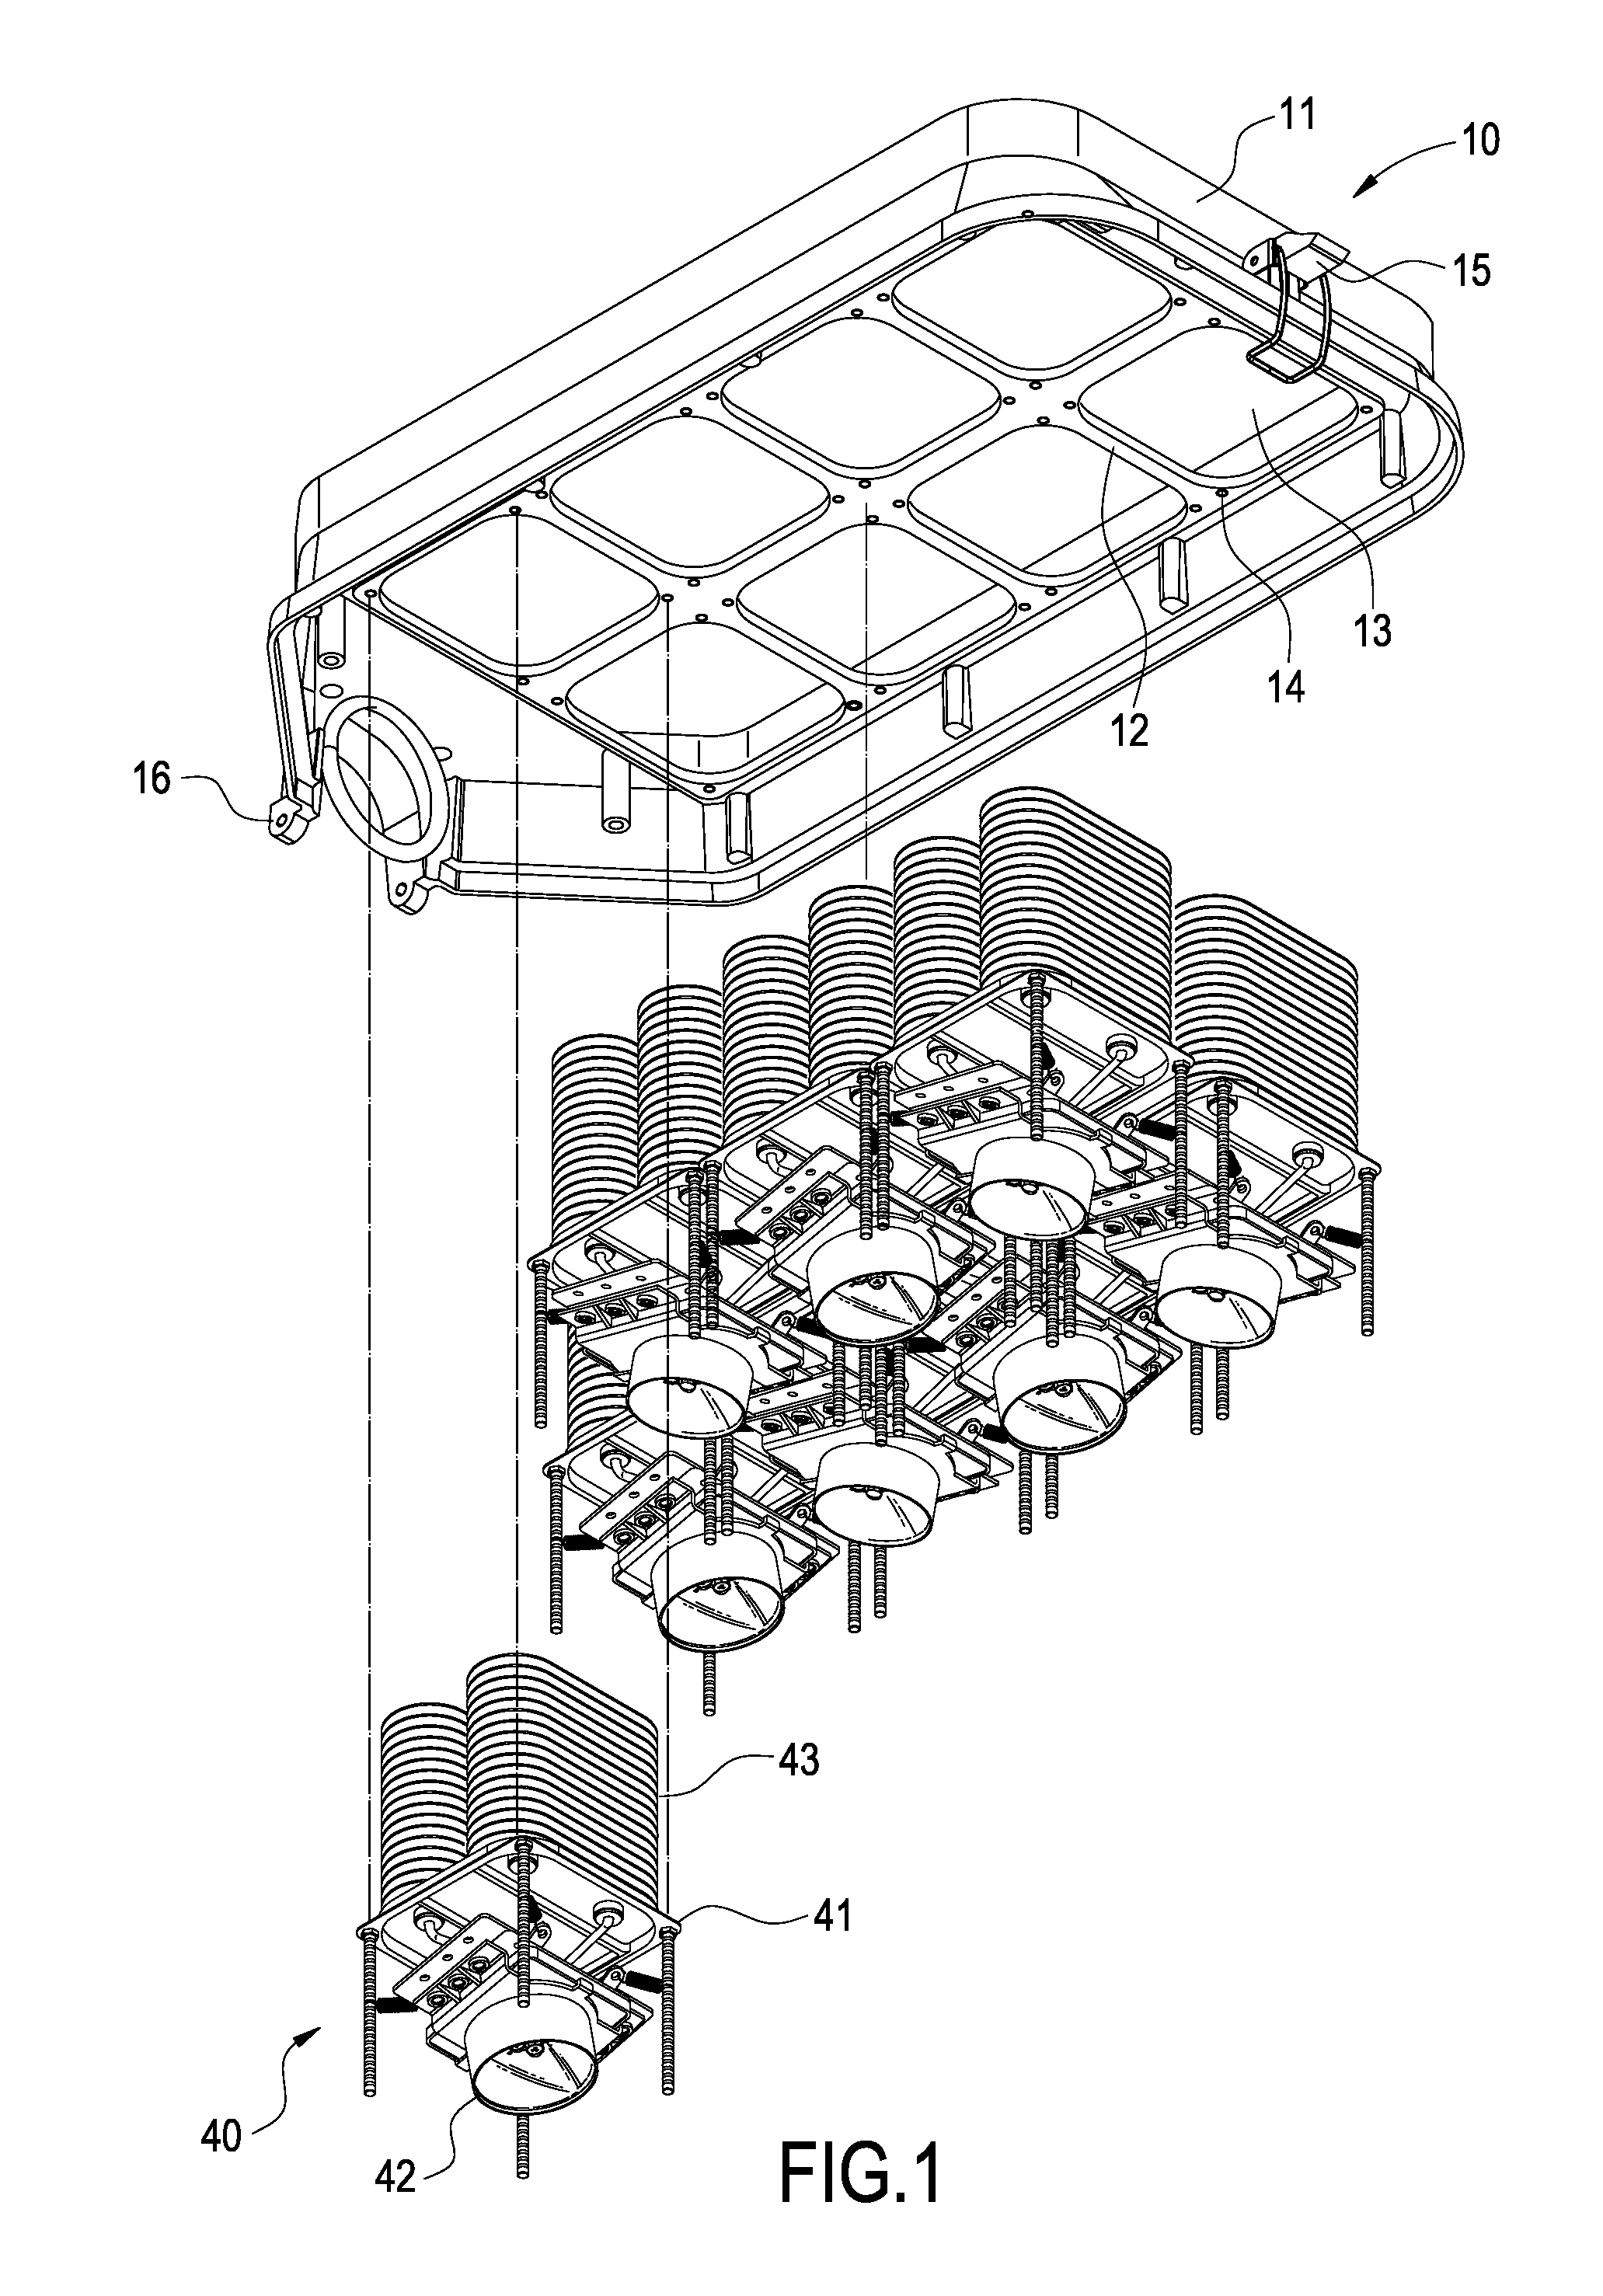 Modulized Assembly Of A Large-sized LED Lamp